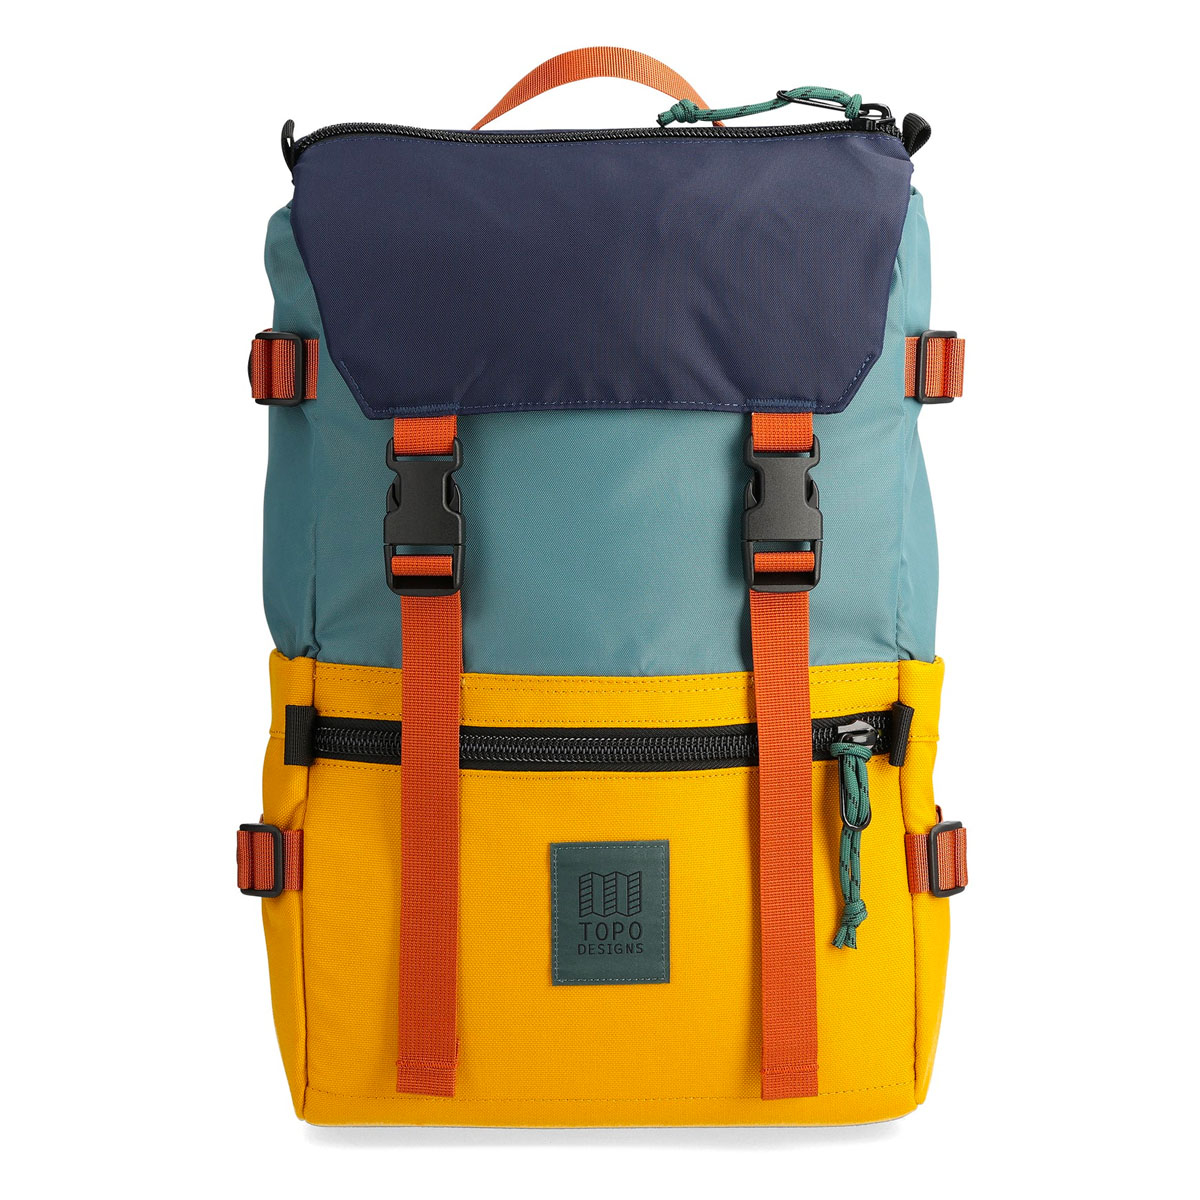 Topo Designs Rover Pack Classic Sea Pine/Mustard, timeless backpack with great functionalities